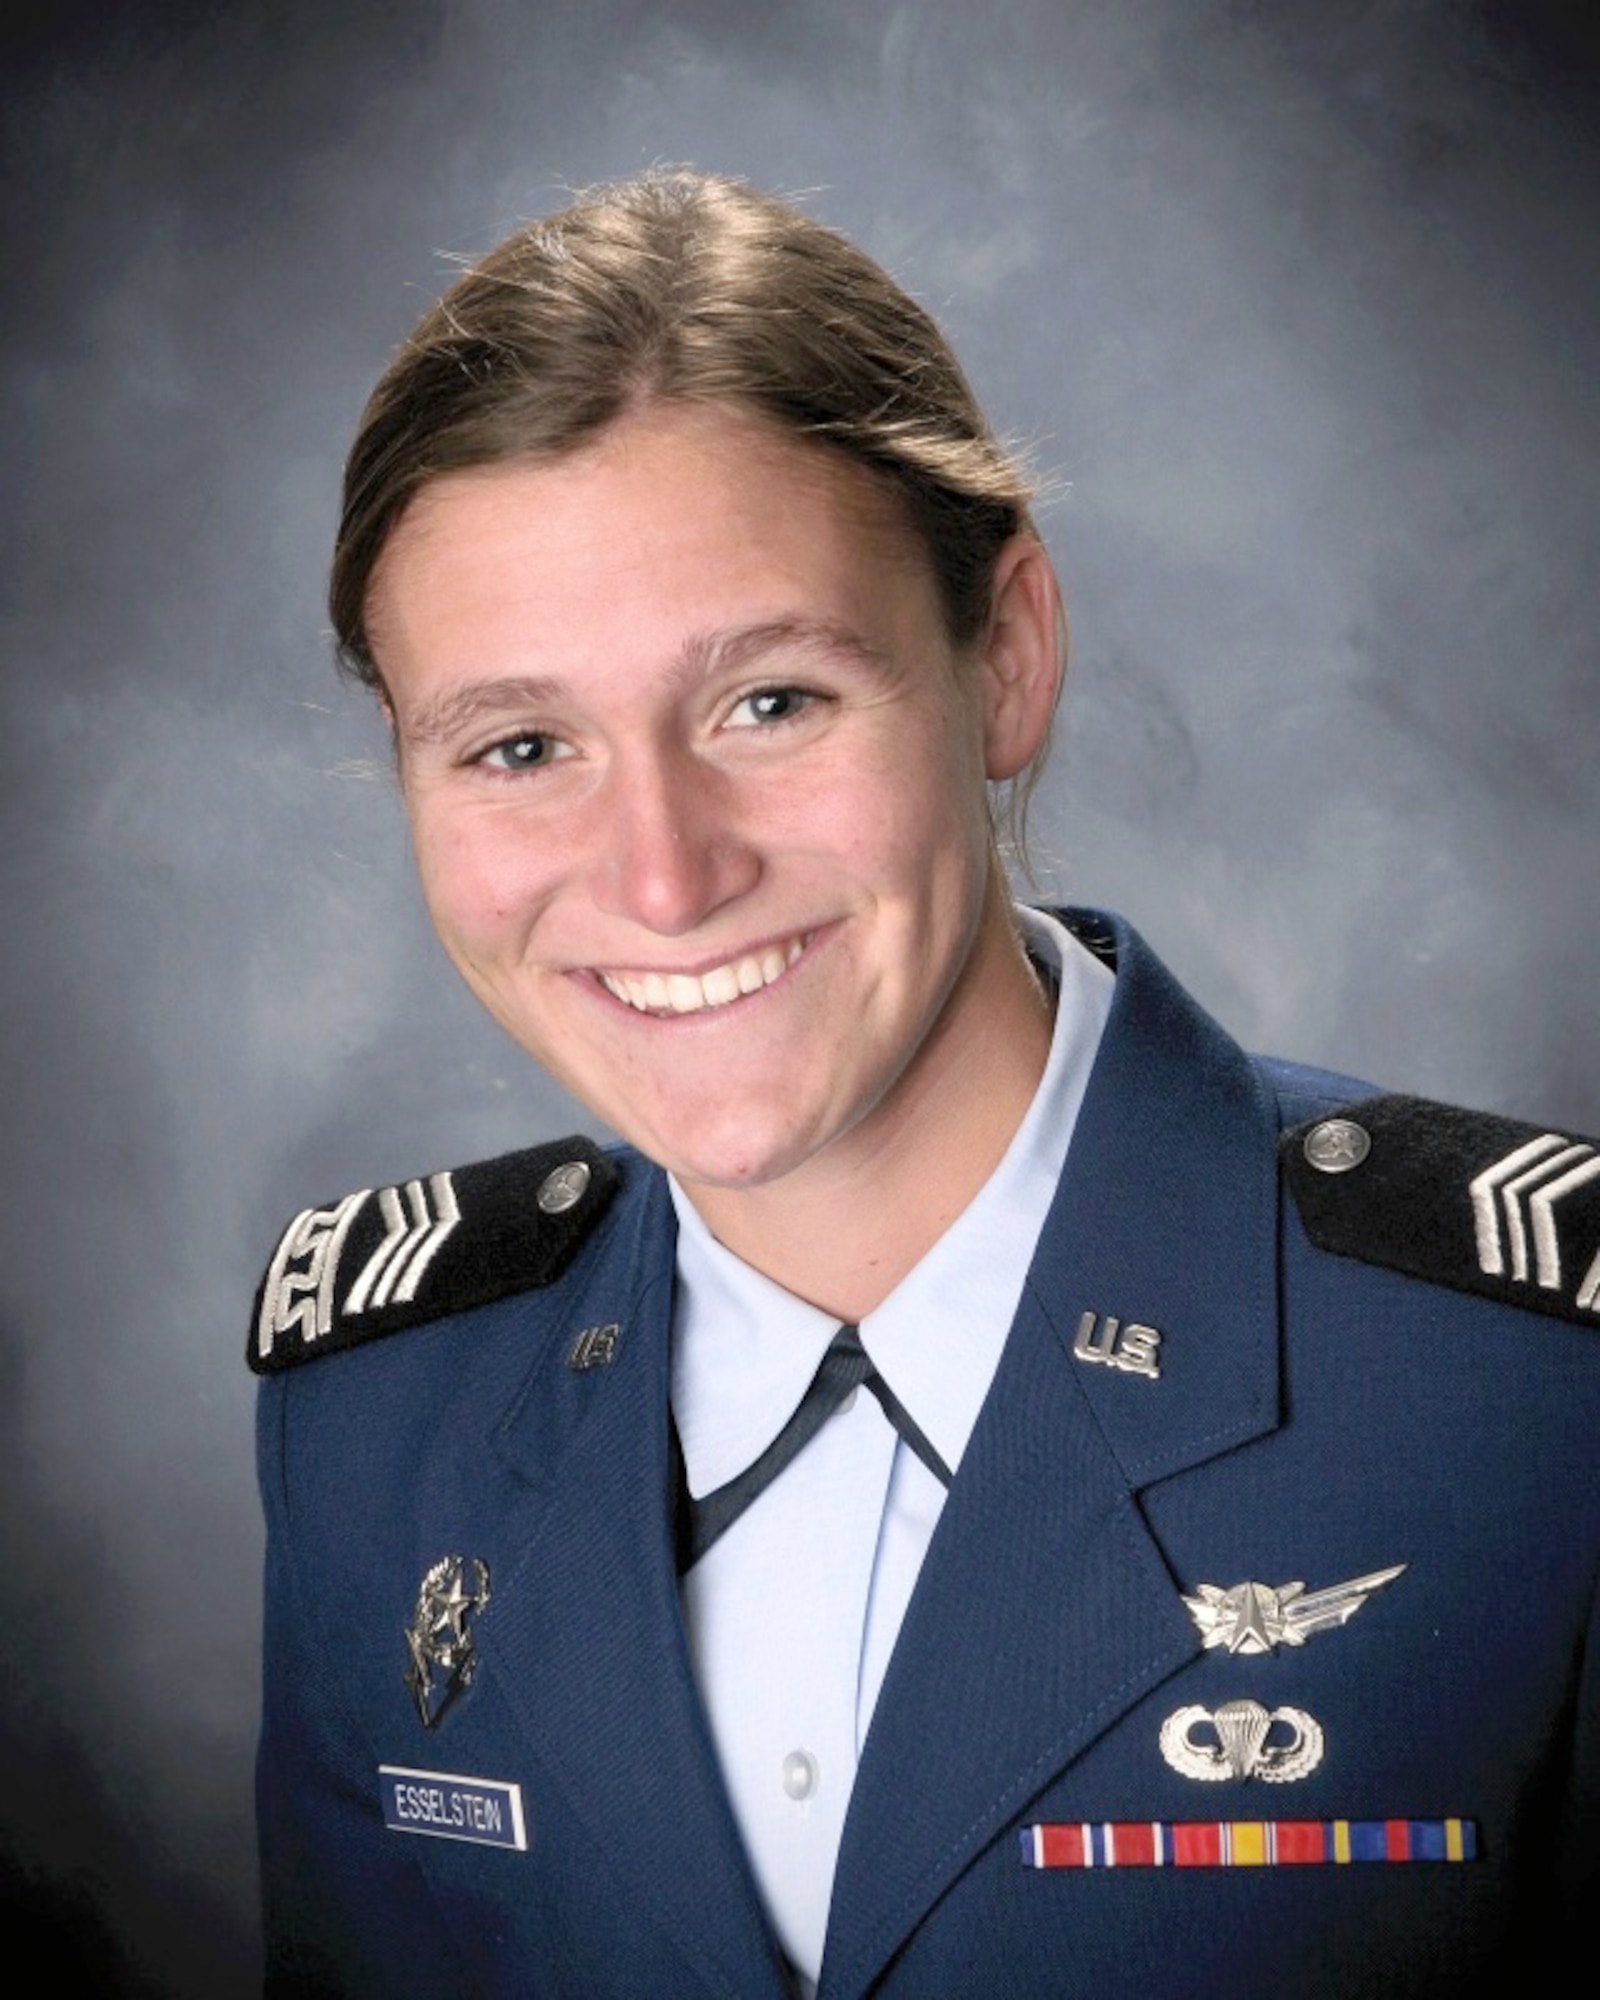 Cadet 1st Class Rebecca Esselstein was named a Rhodes Scholar Nov. 22, 2014, at the U.S. Air Force Academy, Colo., making her the Air Force Academy's 38th recipient and the 12th cadet-athlete to earn the honor. Esselstein is a native of Dayton, Ohio. (U.S. Air Force photo)